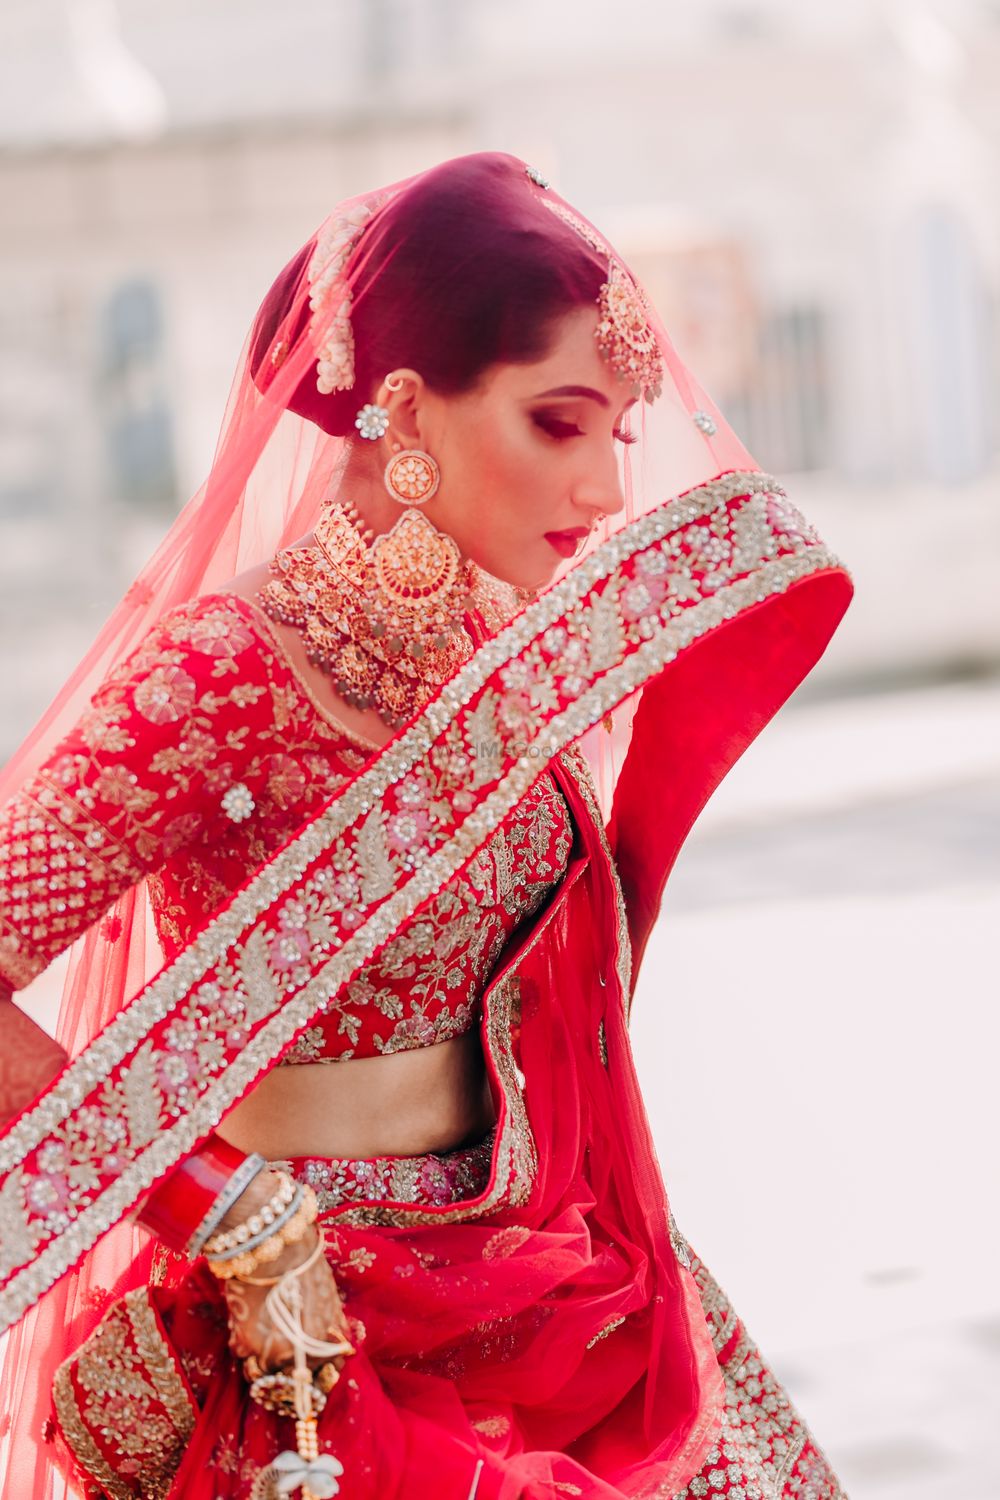 Photo of beautiful bridal portrait idea with the red dupatta as veil